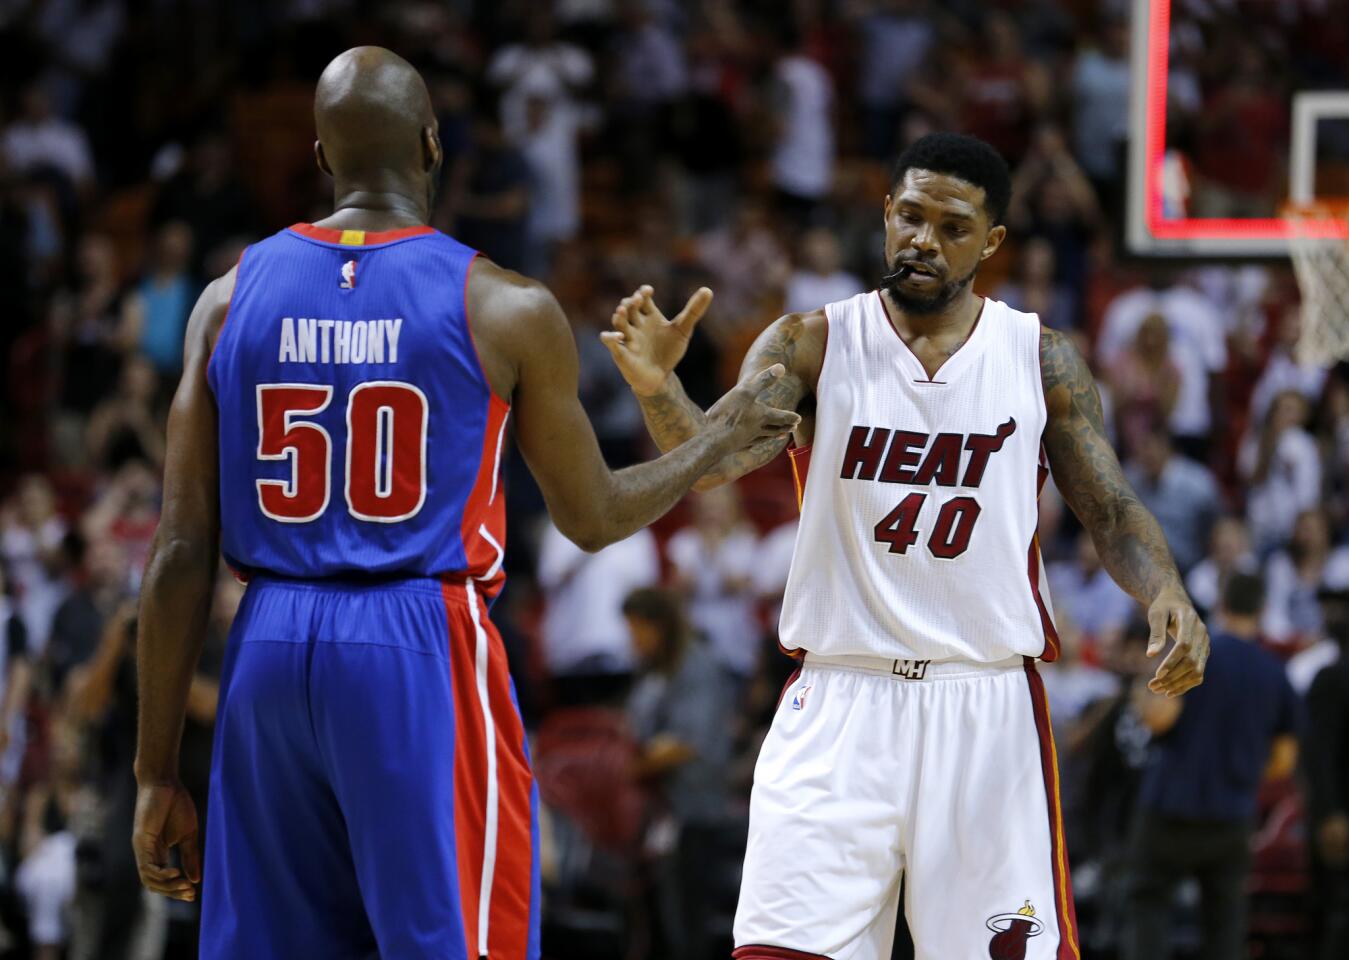 Miami Heat forward Udonis Haslem (40) shakes hands with Detroit Pistons center Joel Anthony (50) after the Heat defeated the Pistons 107-89 in an NBA basketball game, Tuesday, April 5, 2016, in Miami. Anthony is a former Heat player. (AP Photo/Joe Skipper)